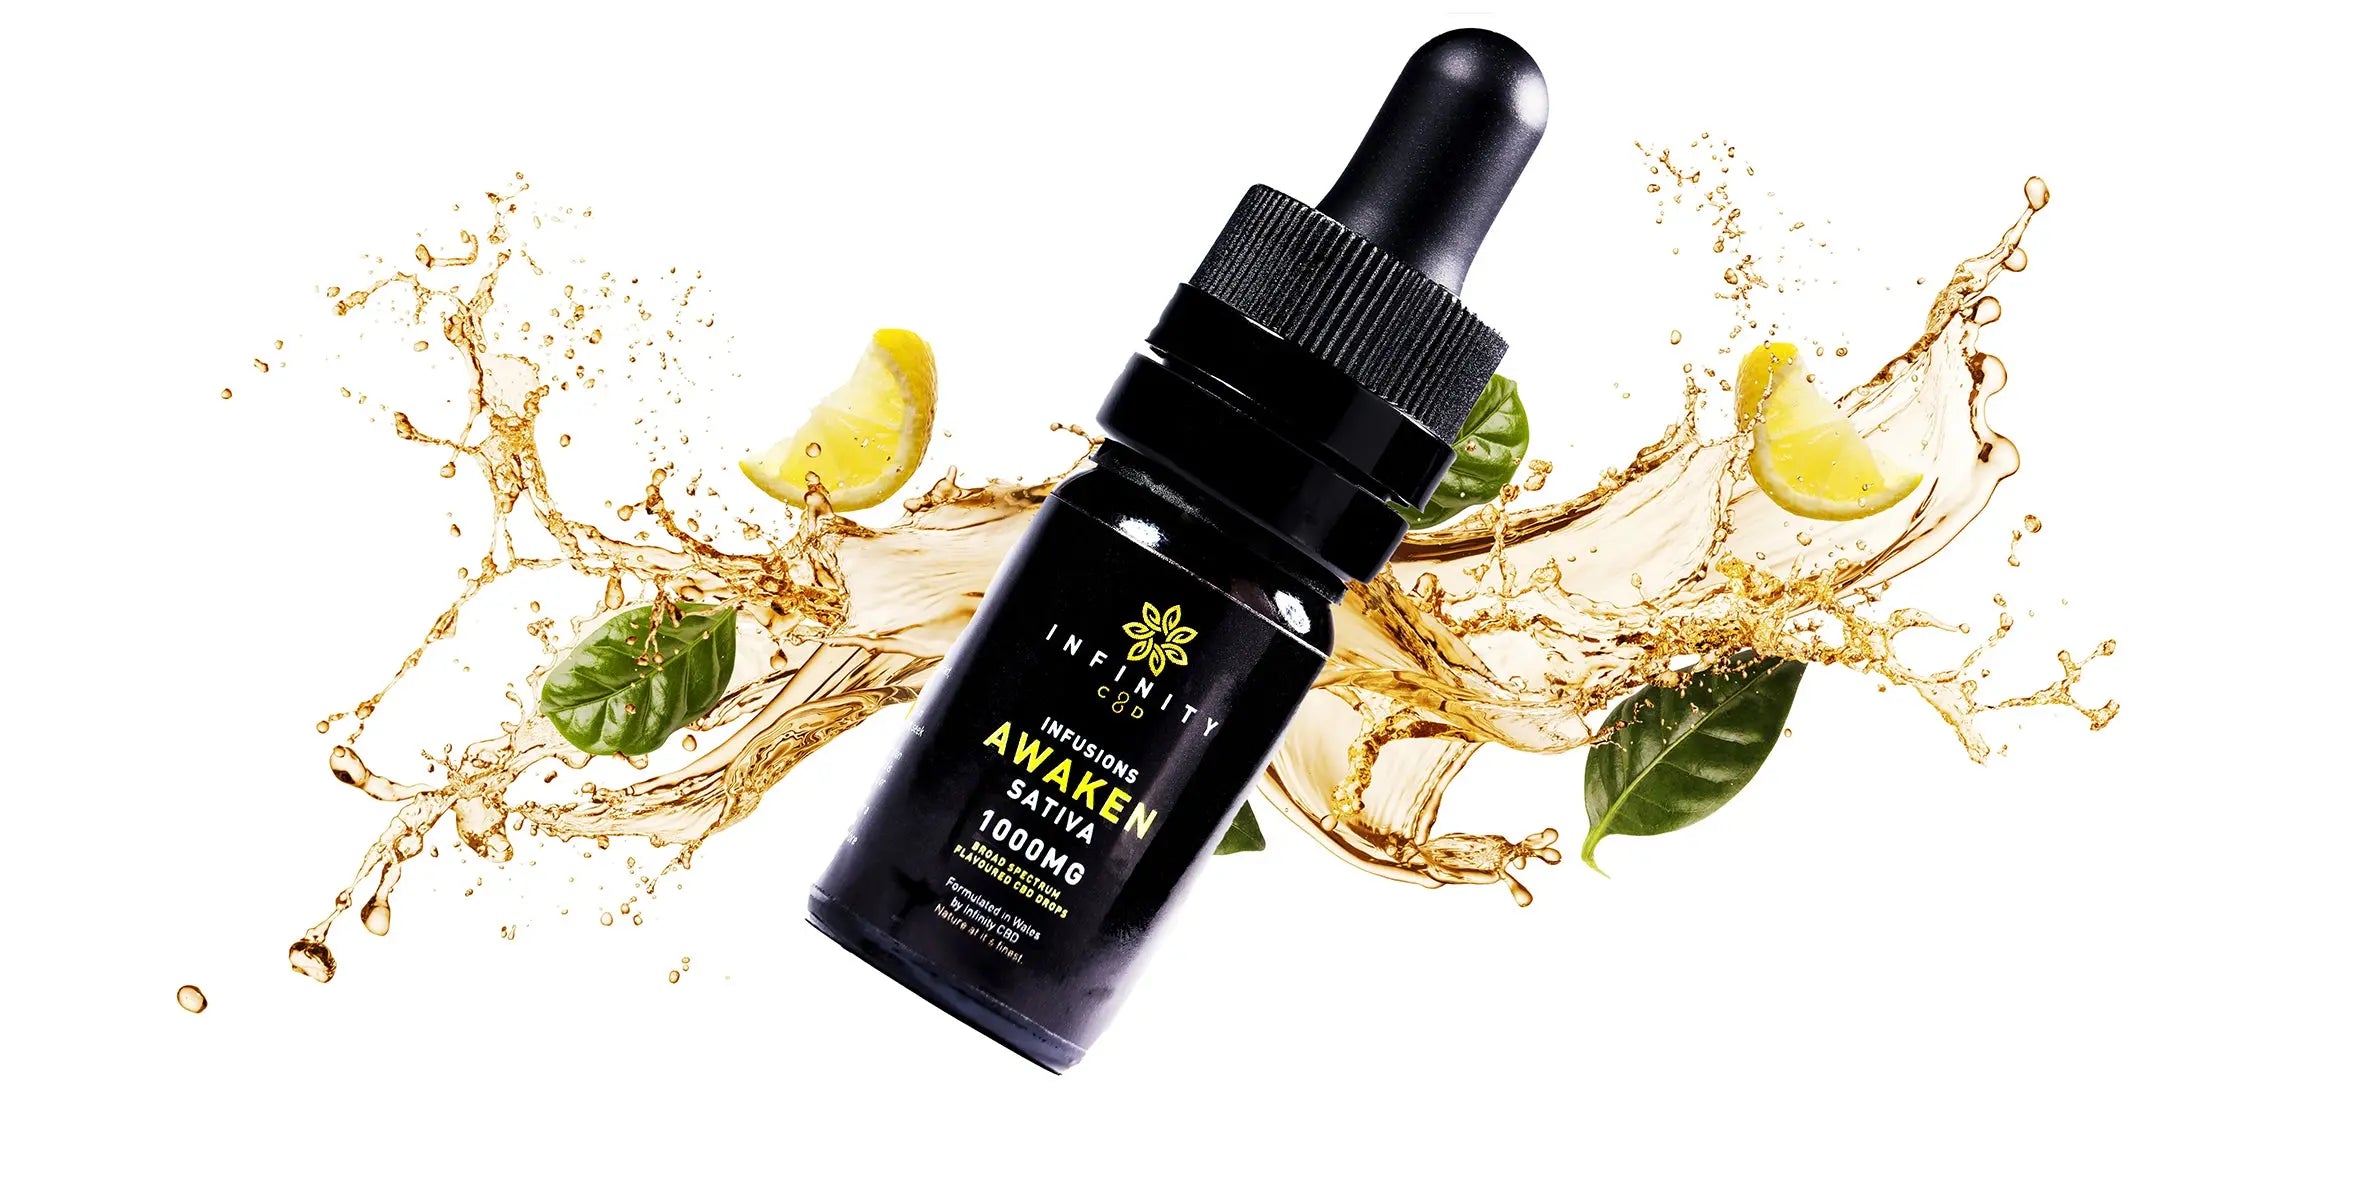 Best Extra Strong CBD Oil Drops UK 